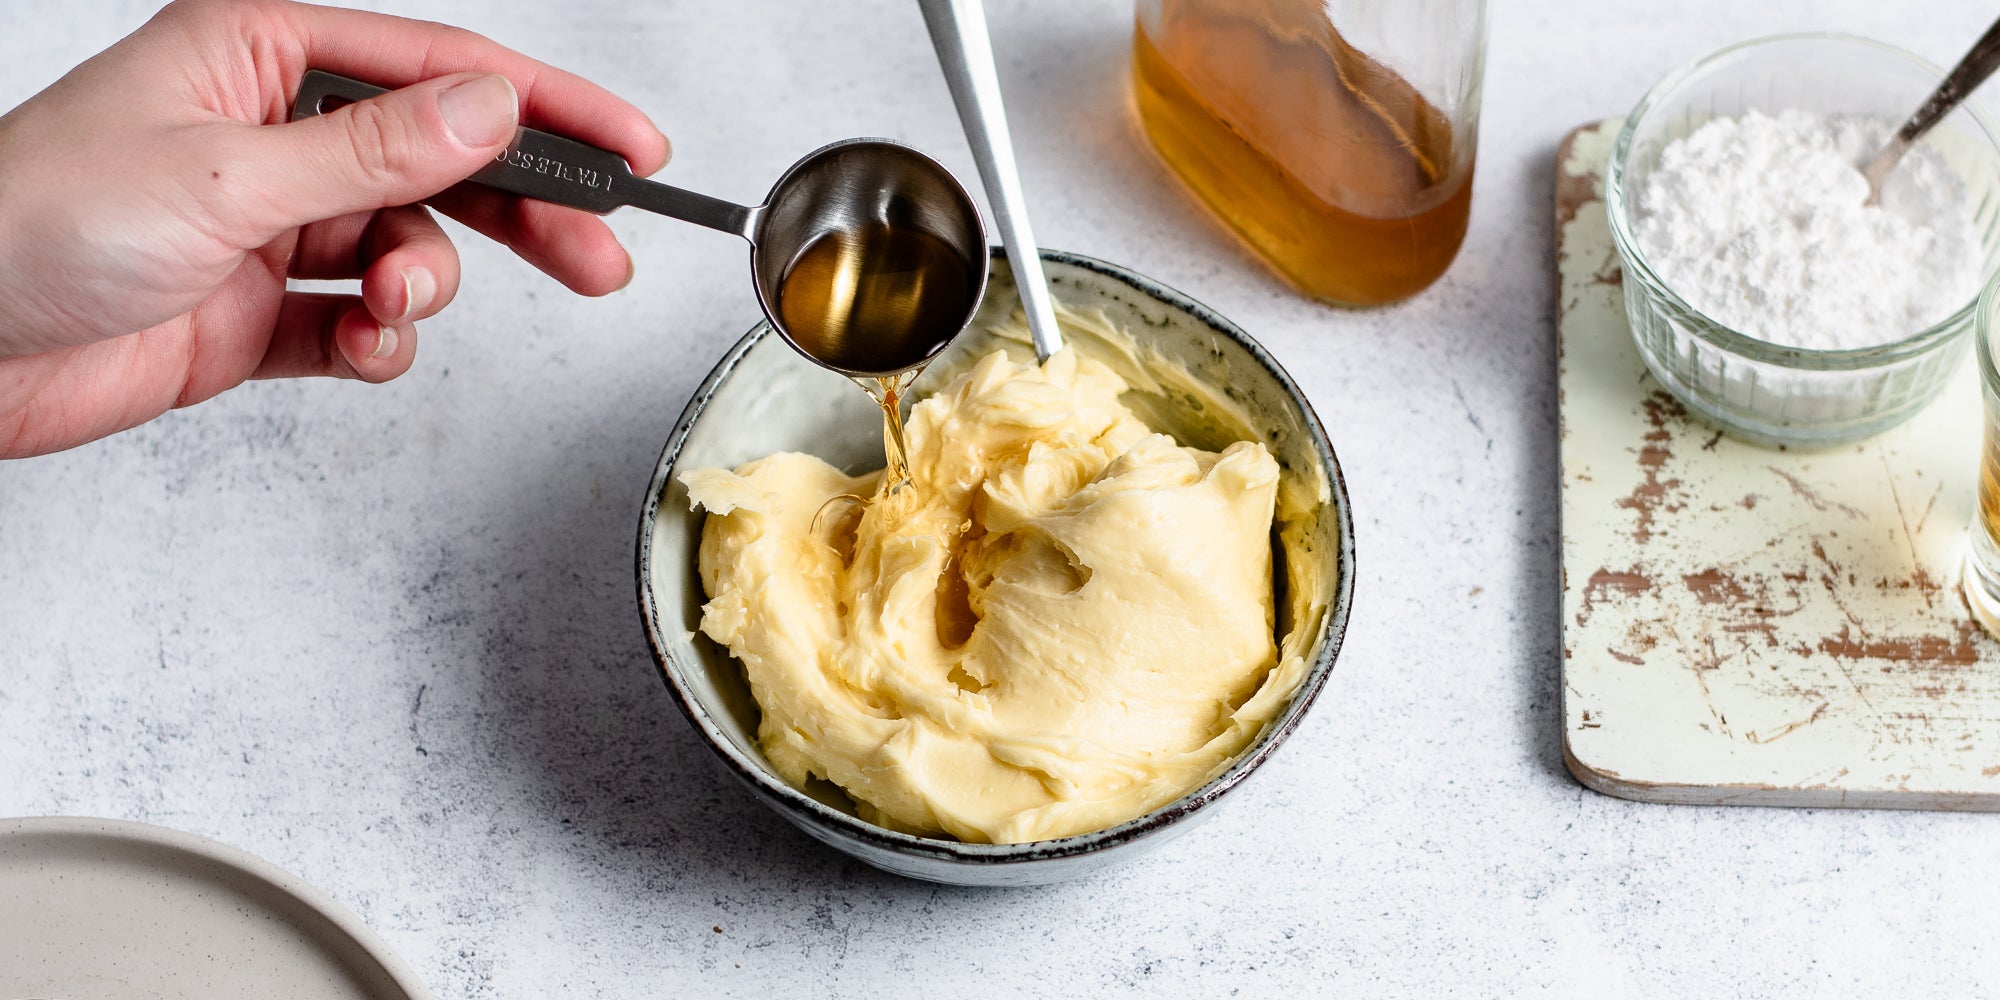 Top view of creamed butter in a bowl adding a measure of brandy with a hand holding the scoop